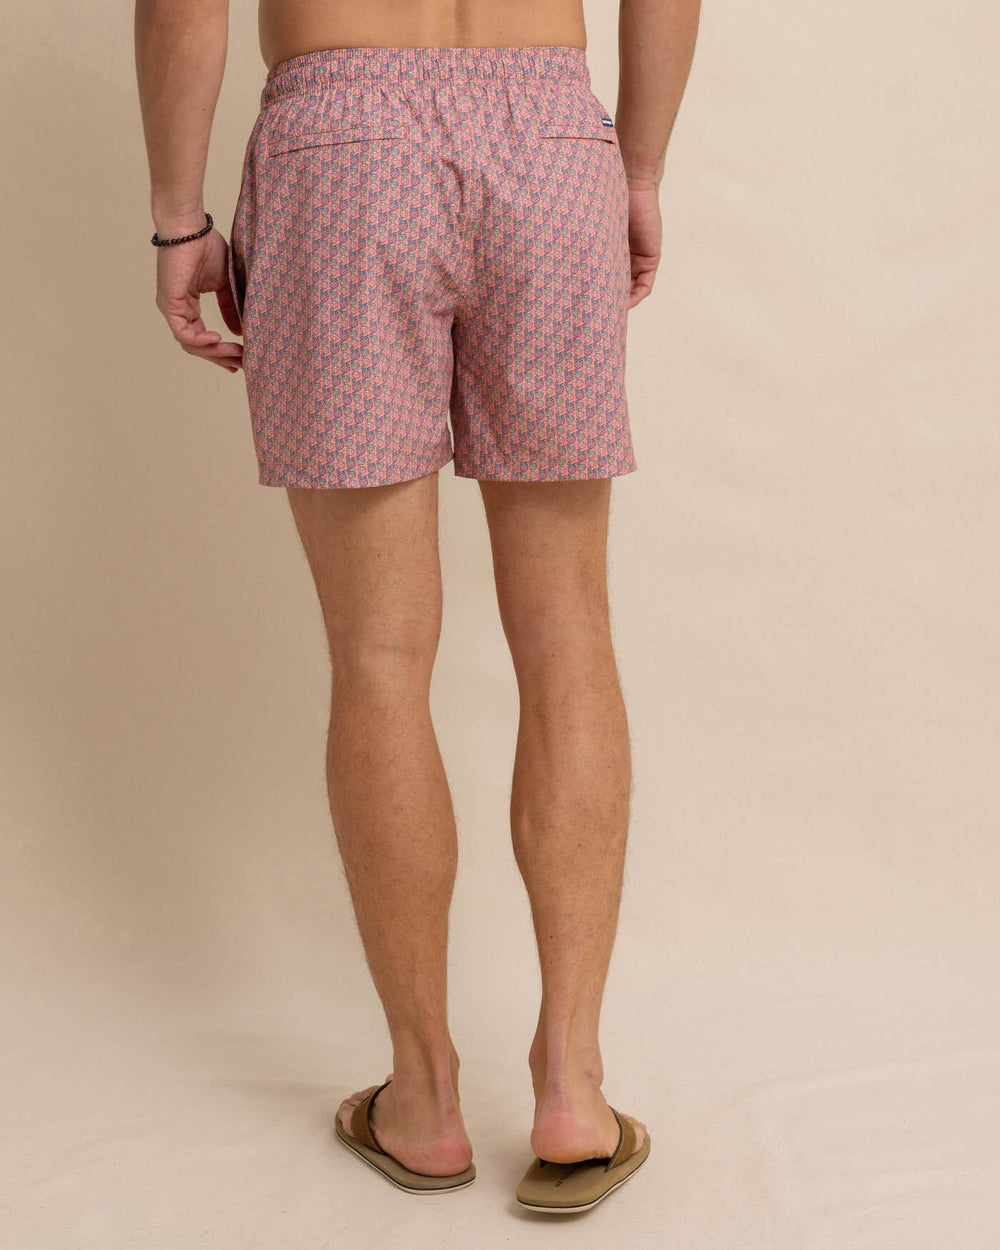 The front view of the Southern Tide Vacation Views Swim Trunk by Southern Tide - Desert Flower Coral